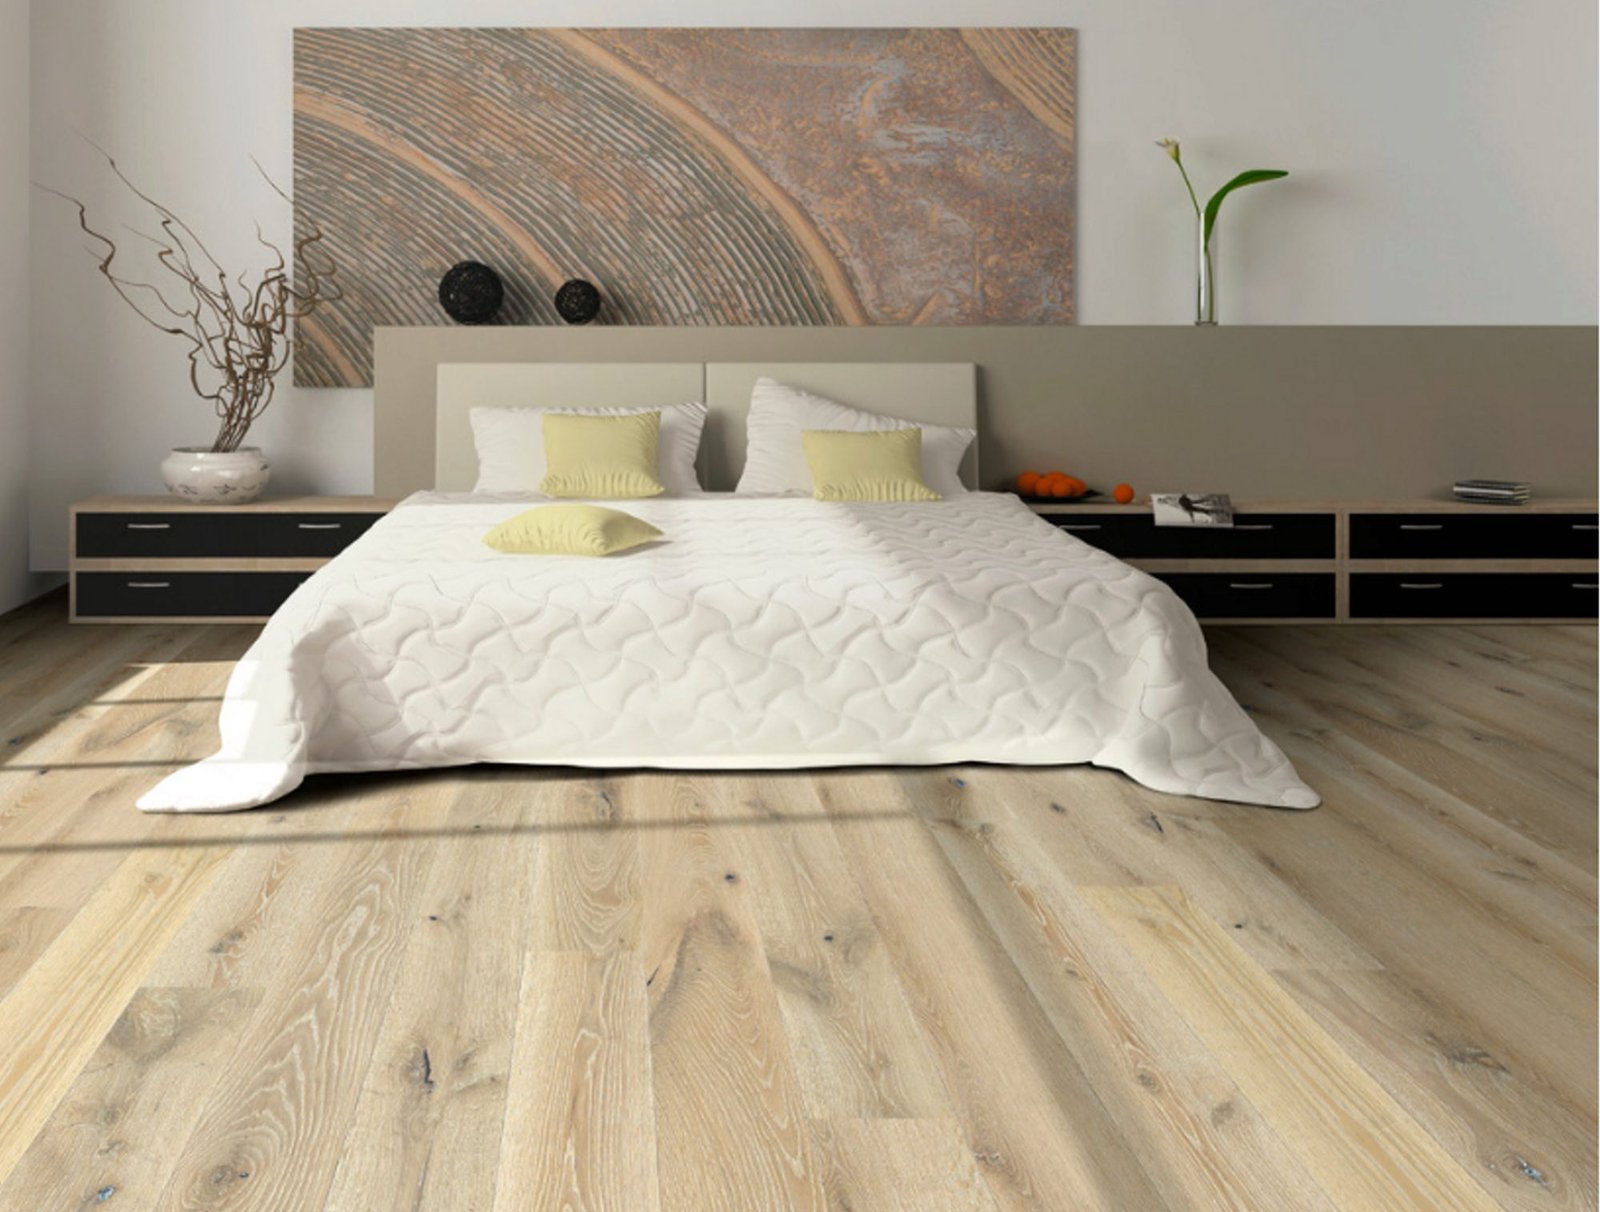 Solid Wood and Engineered Wood – A Good Choice for Your Home Flooring